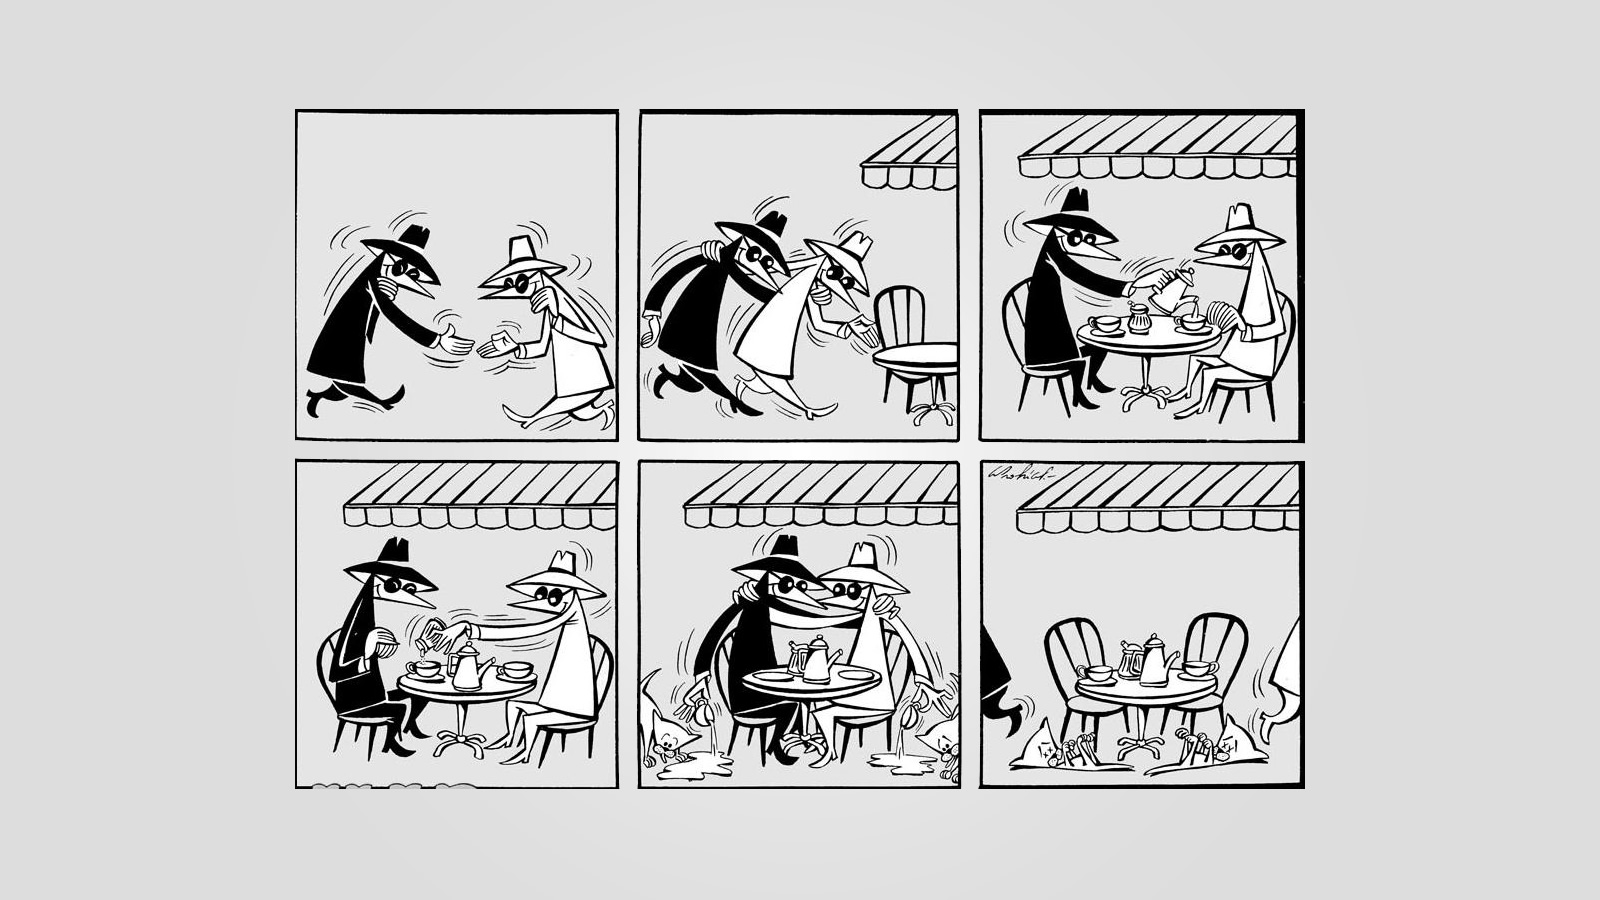 Panels from a Spy vs Spy comic from MAD magazine